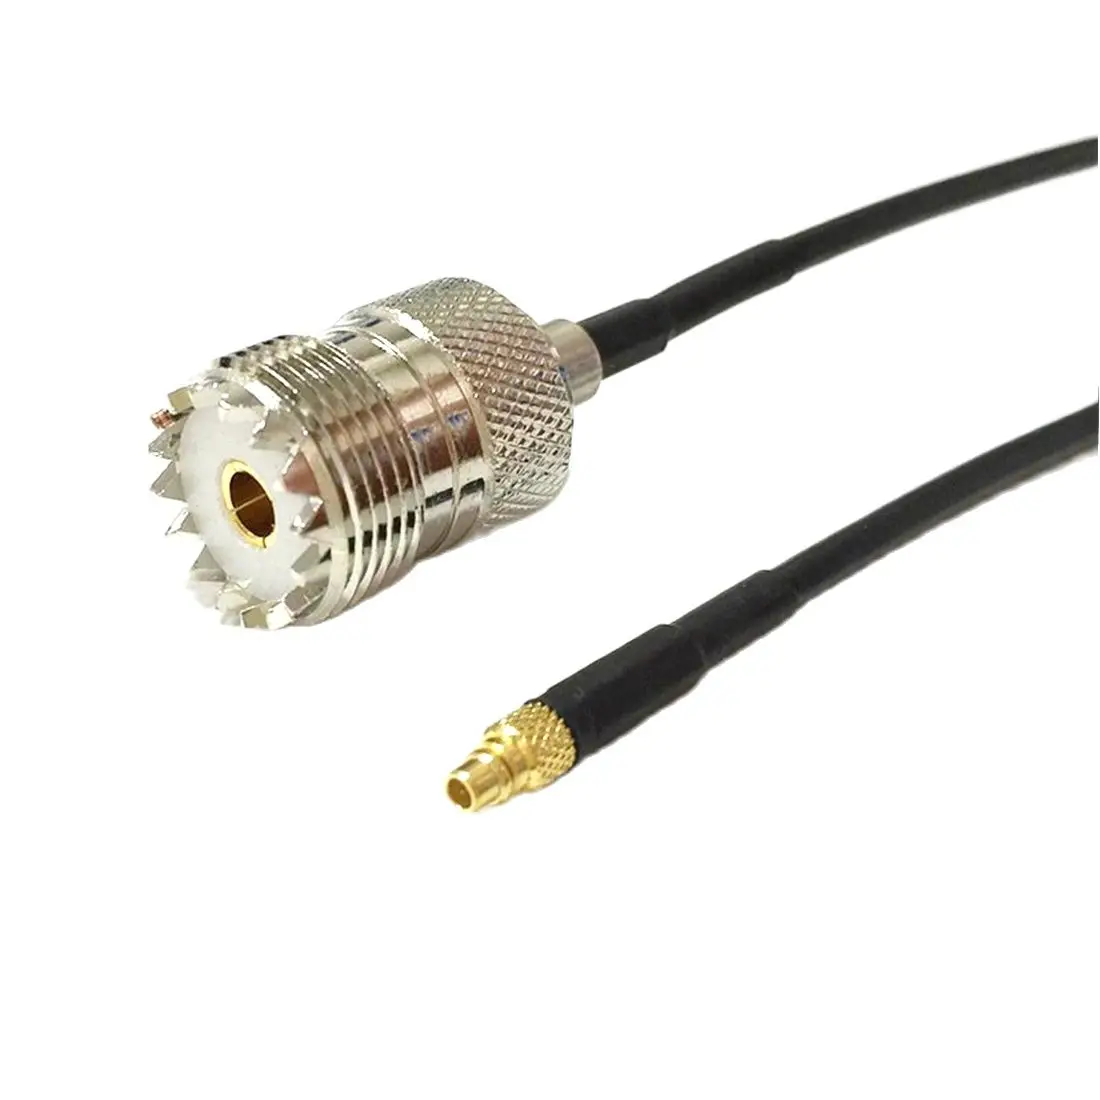 New Modem Coaxial Cable UHF Female Jack Connector Switch MMCX Male Plug Connector RG174 Cable 20CM 8inch Adapter hifi ofc silver plated 4 4mm to 2rca aux audio cable high grade 4 4mm jack to 2rca male cable for headphone speaker amplifier